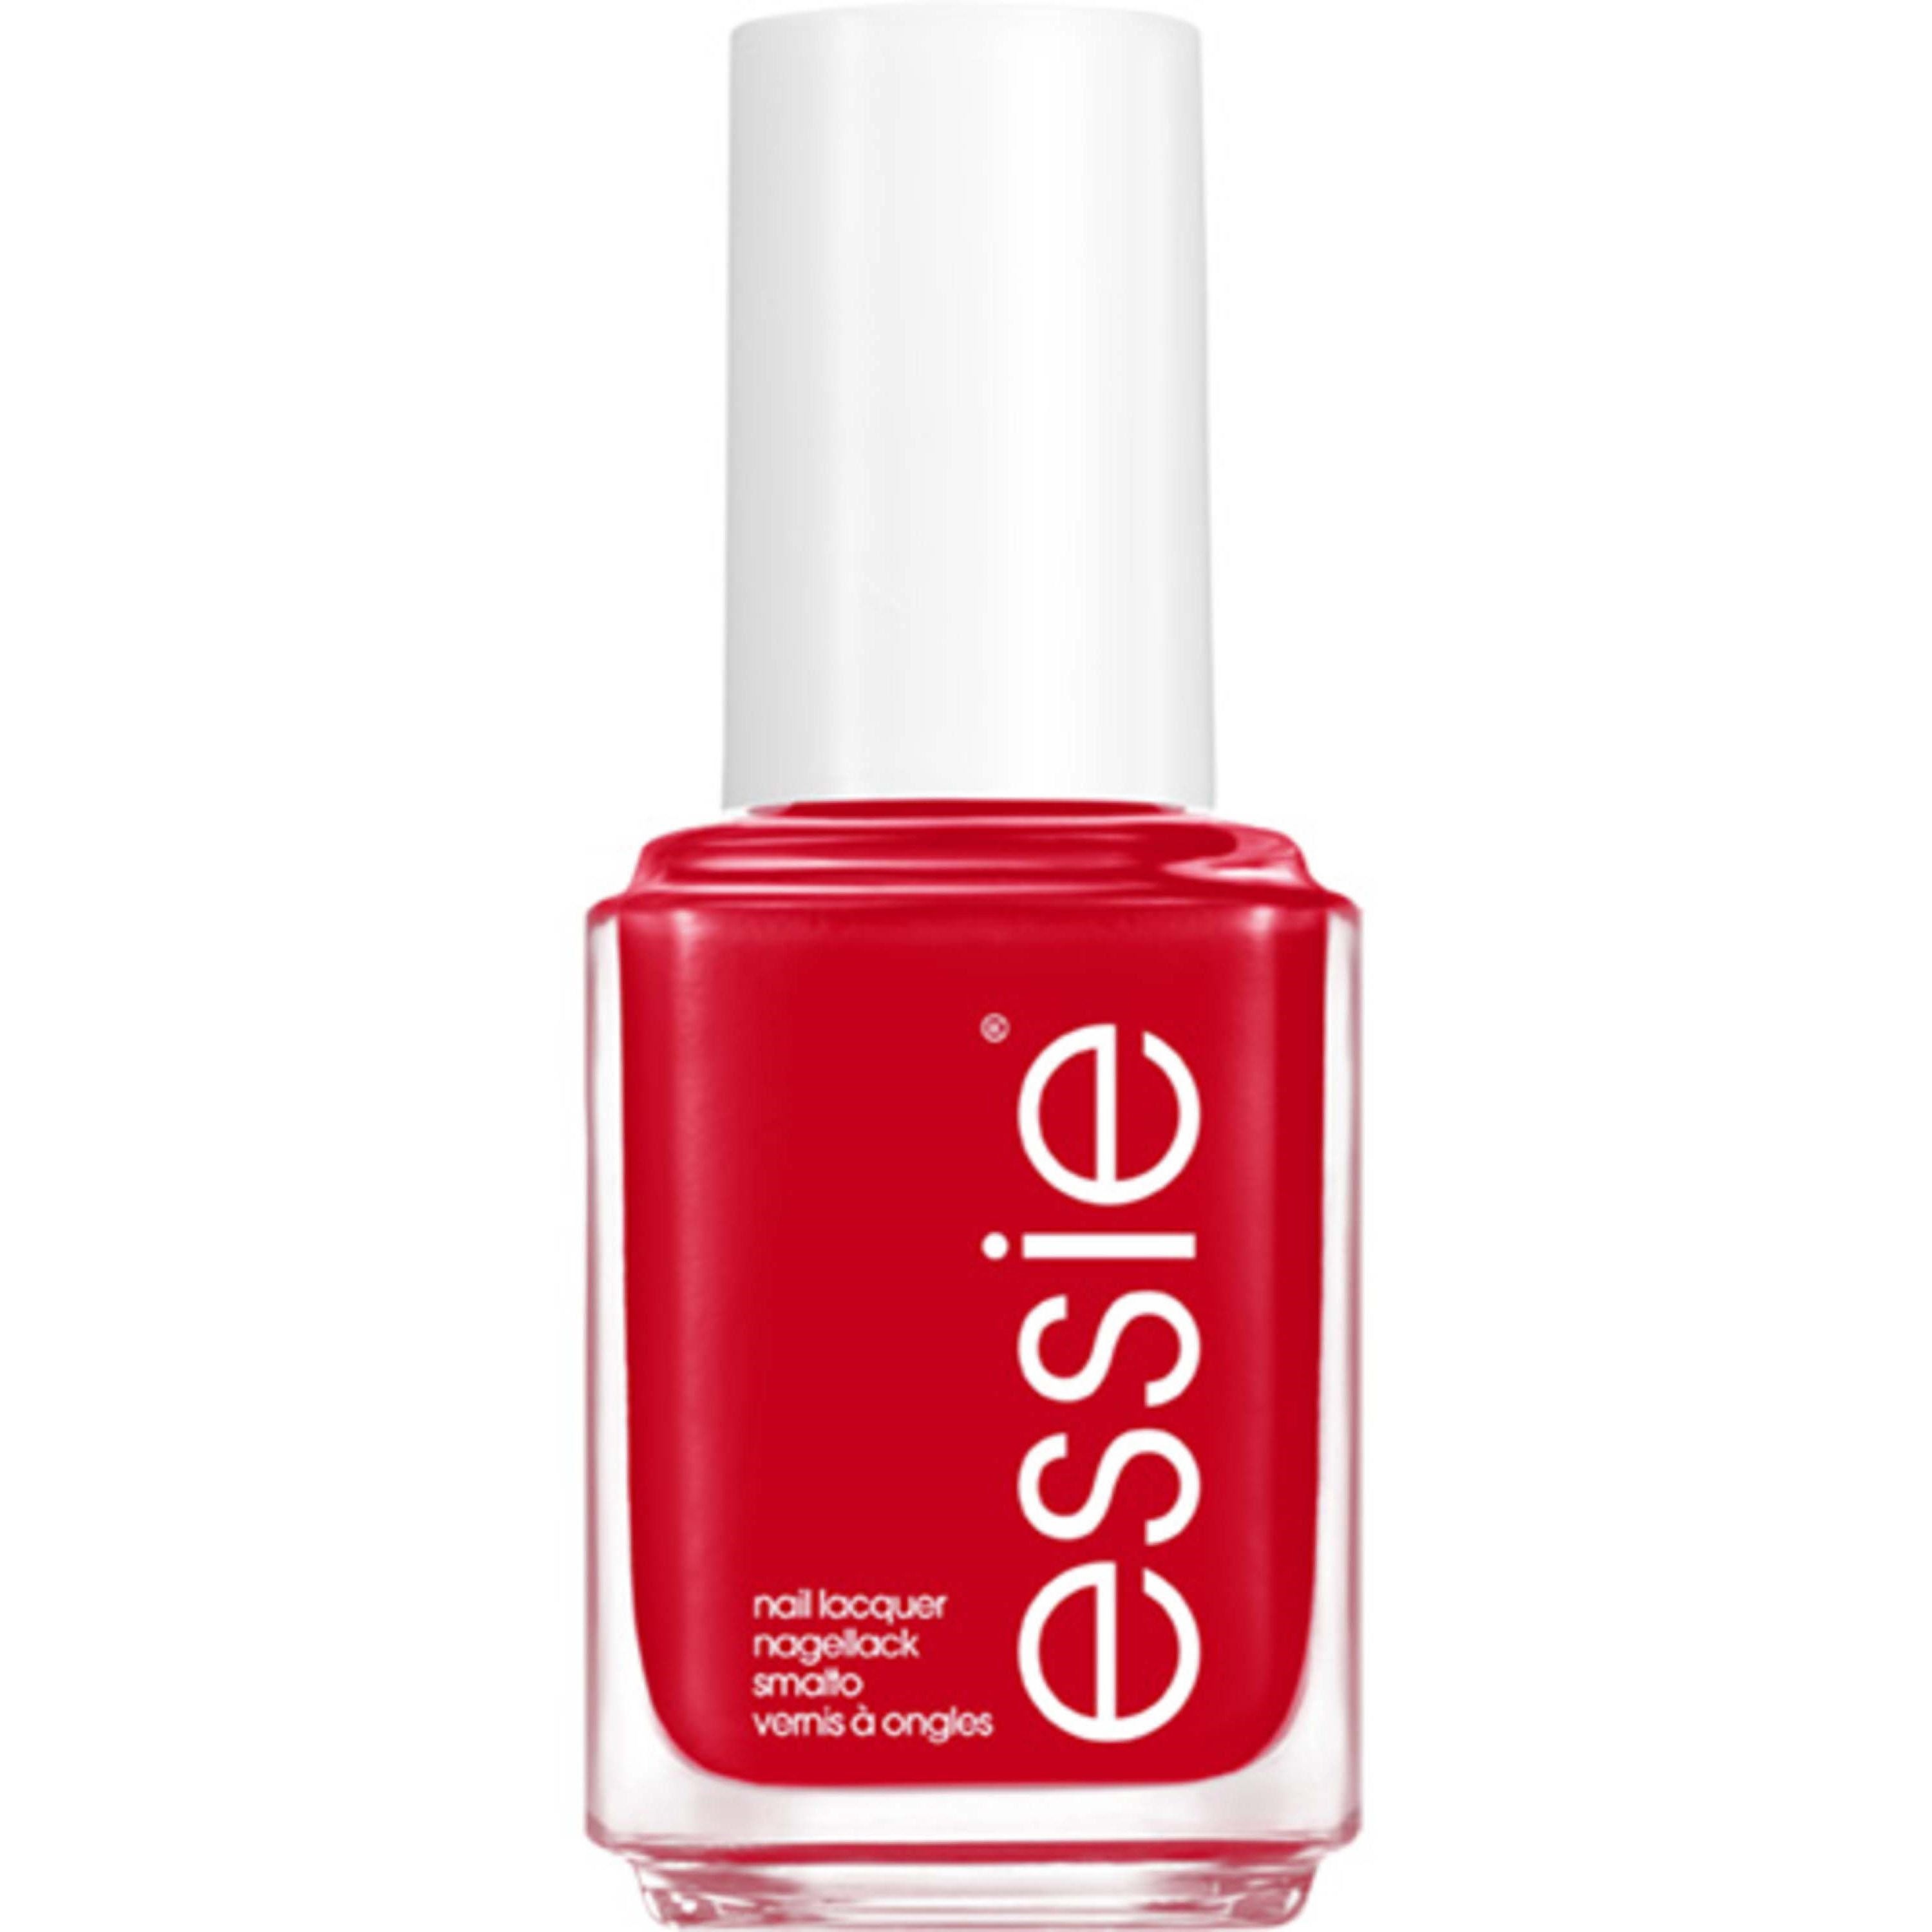 Bilde av Essie Not Red-y For Bed Collection Nail Lacquer 750 Not Red-y For Bed